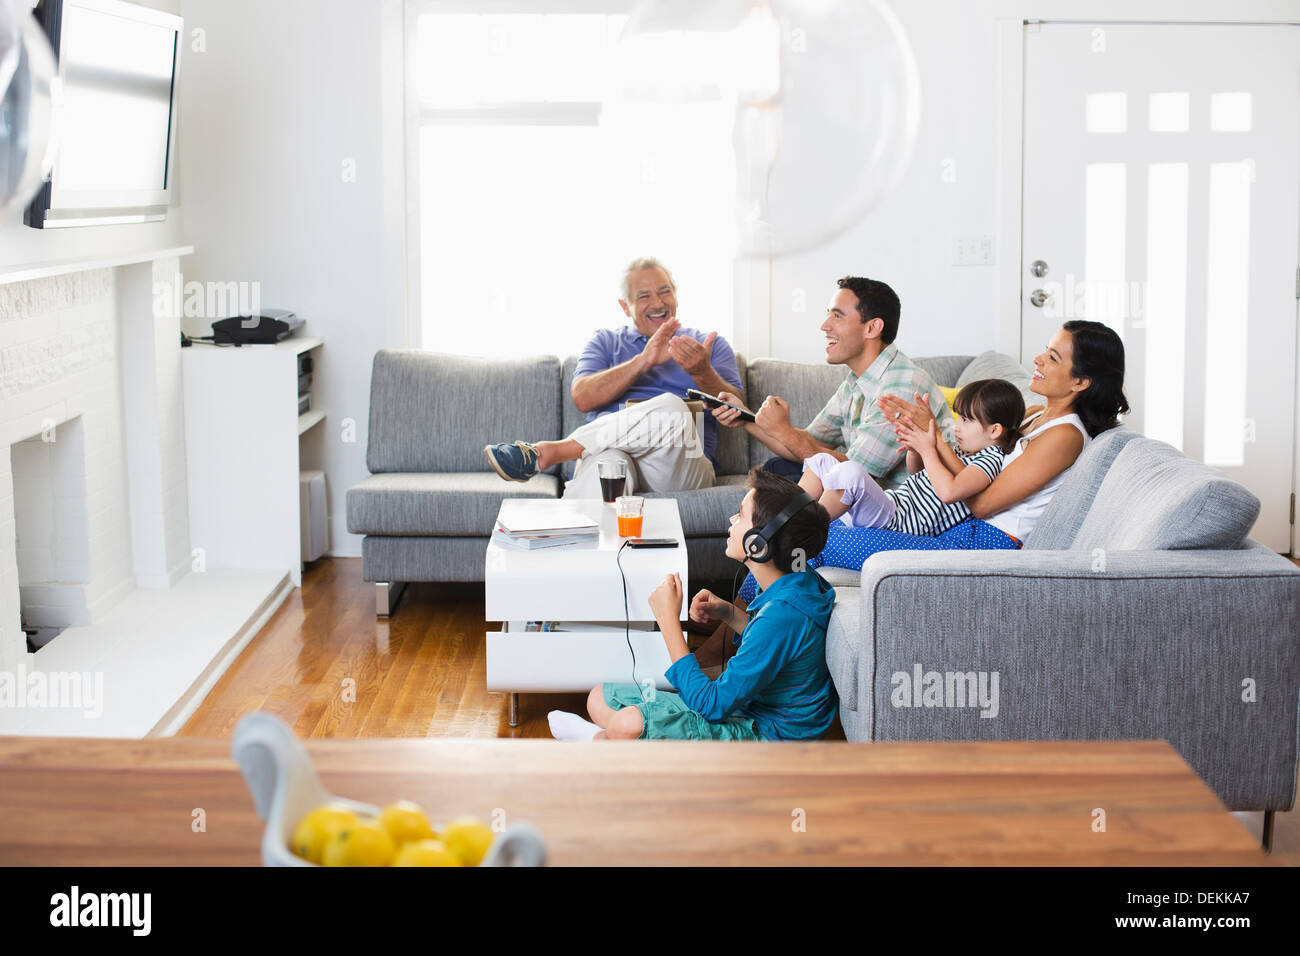 Family watching television together in living room Stock Photo